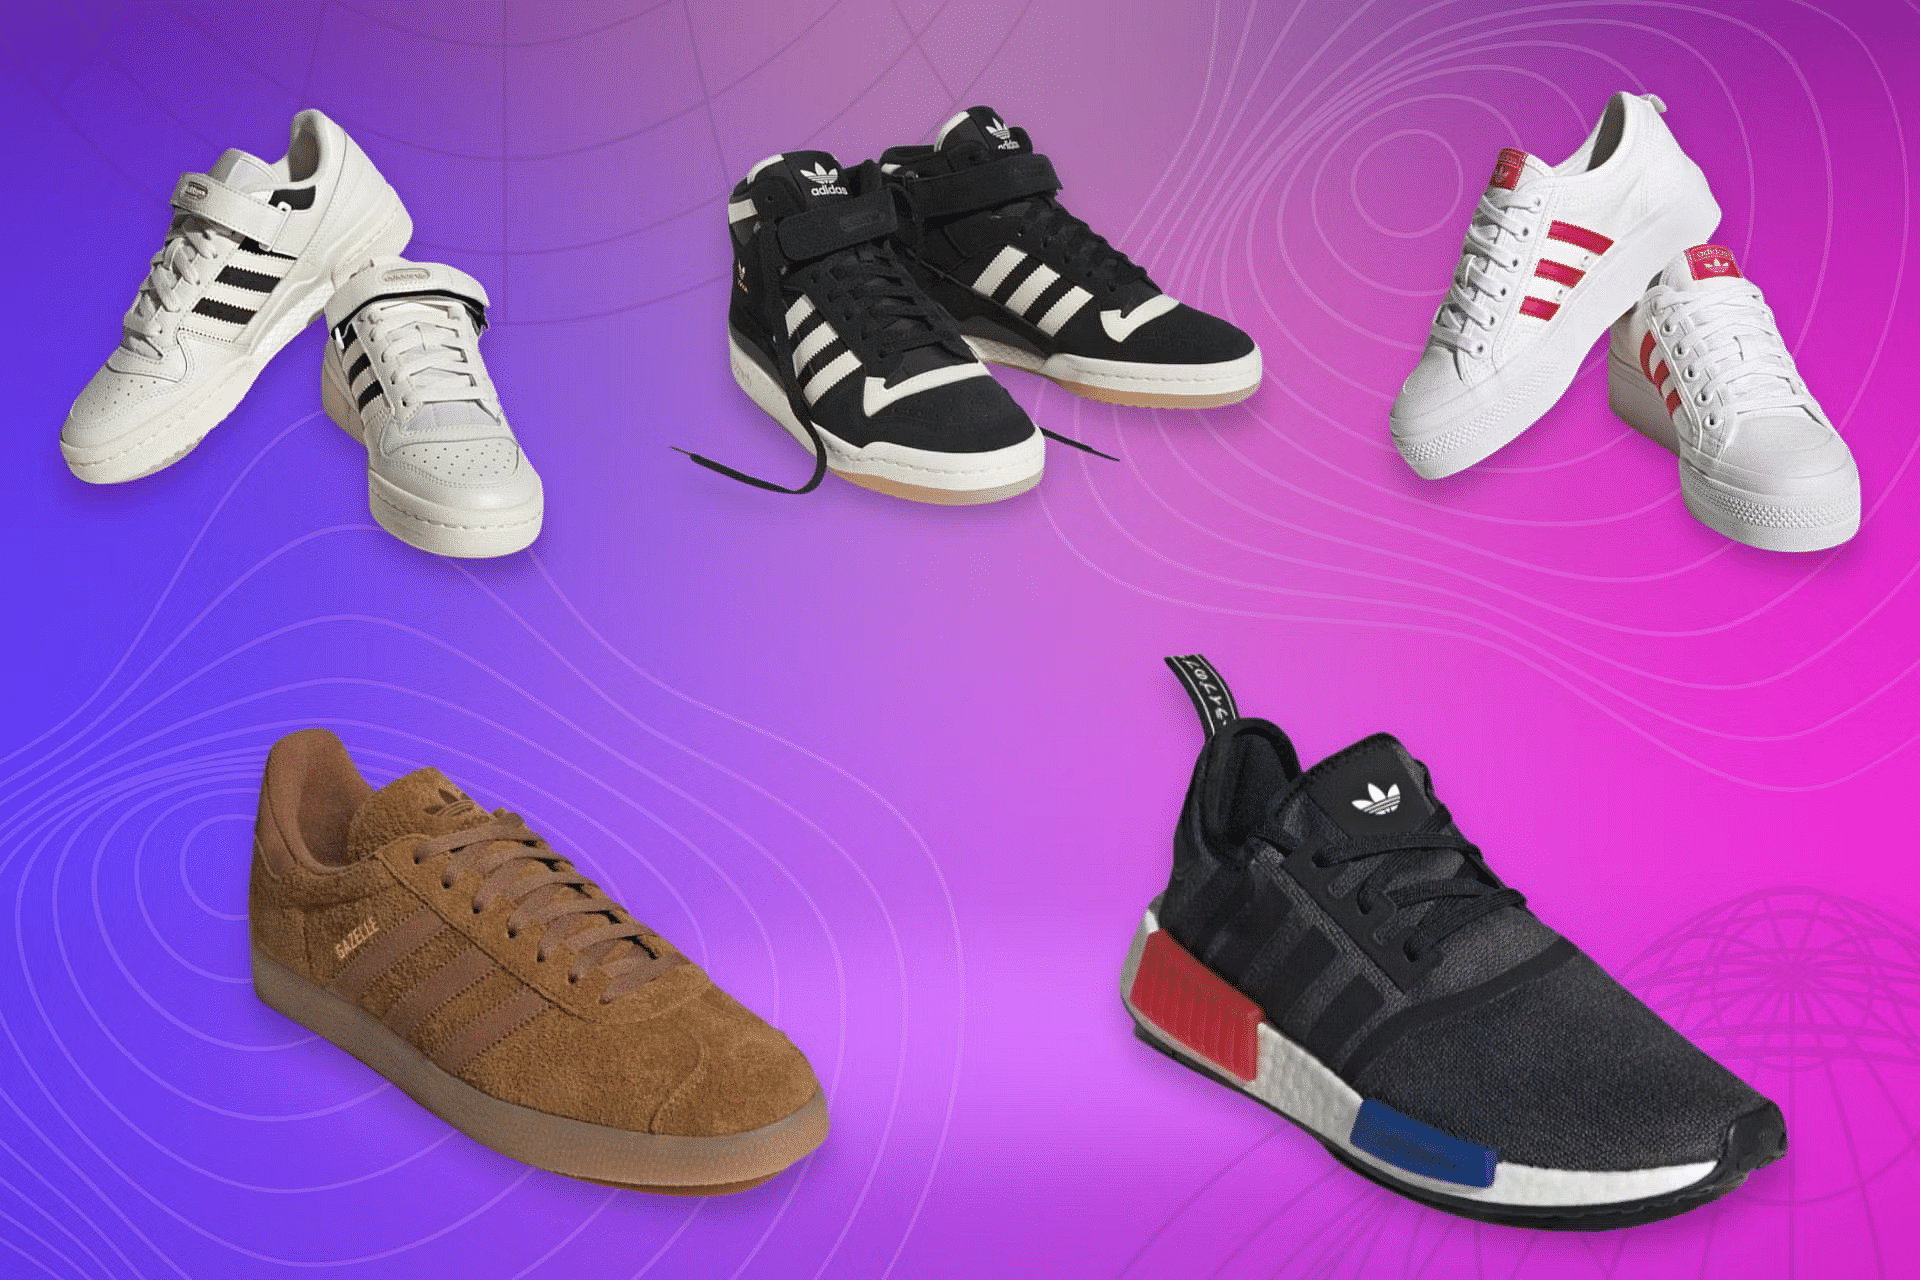 Are These Adidas Skate Shoes the Sneakers of Summer 2023?